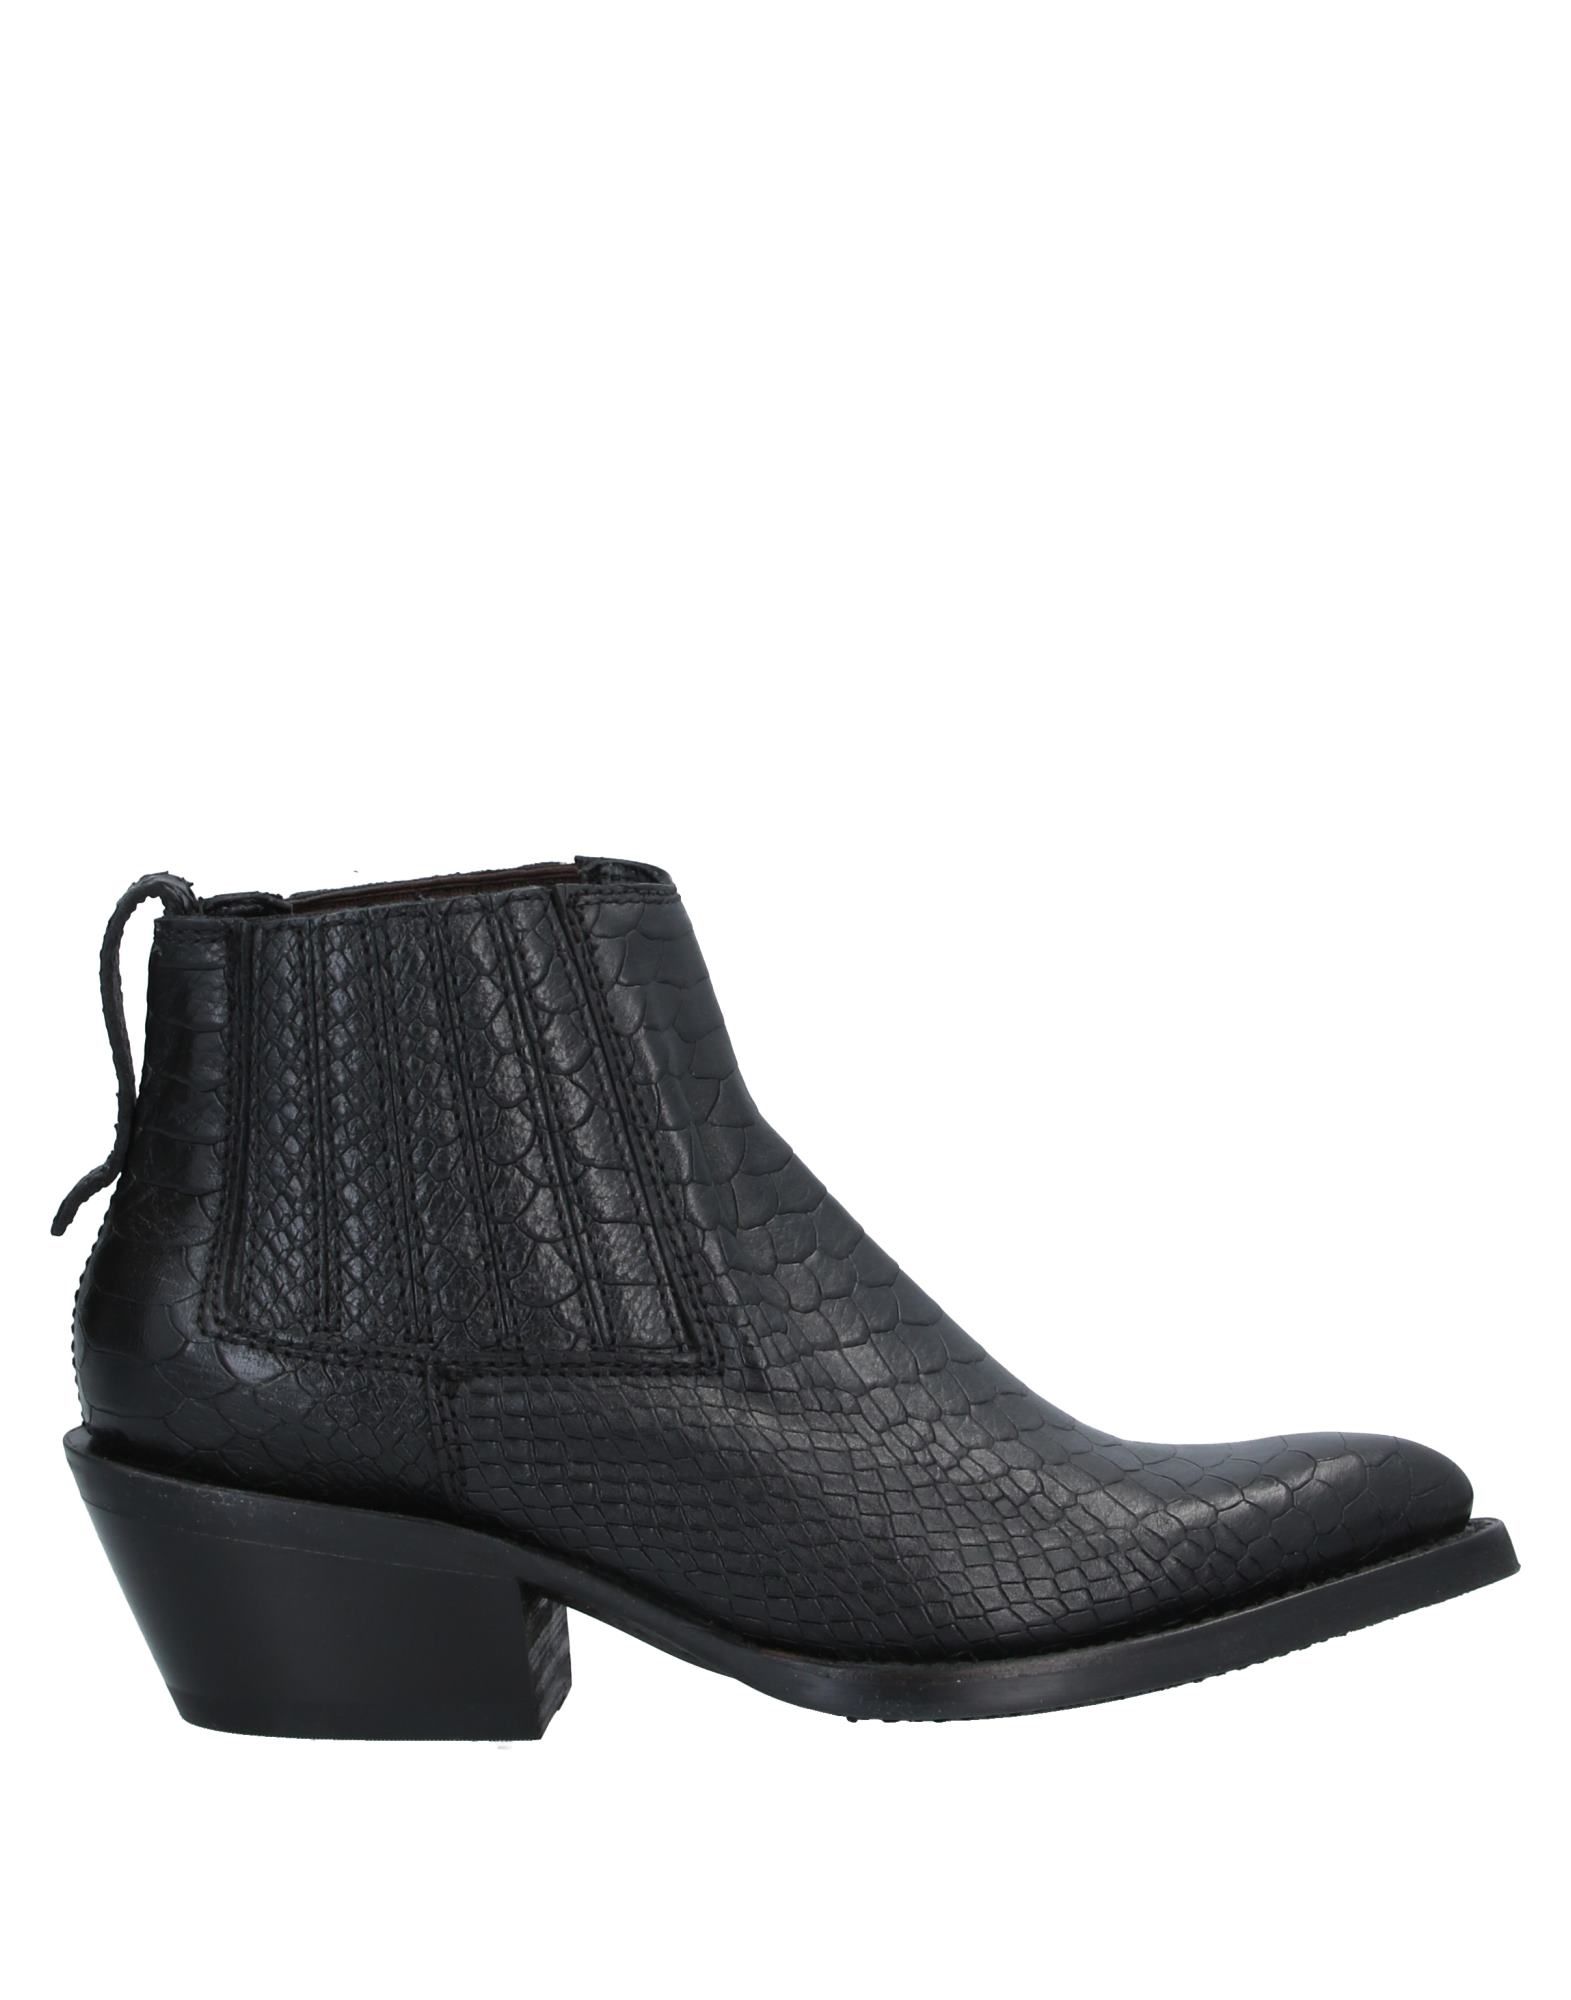 ASH Ankle boots - Item 11919585